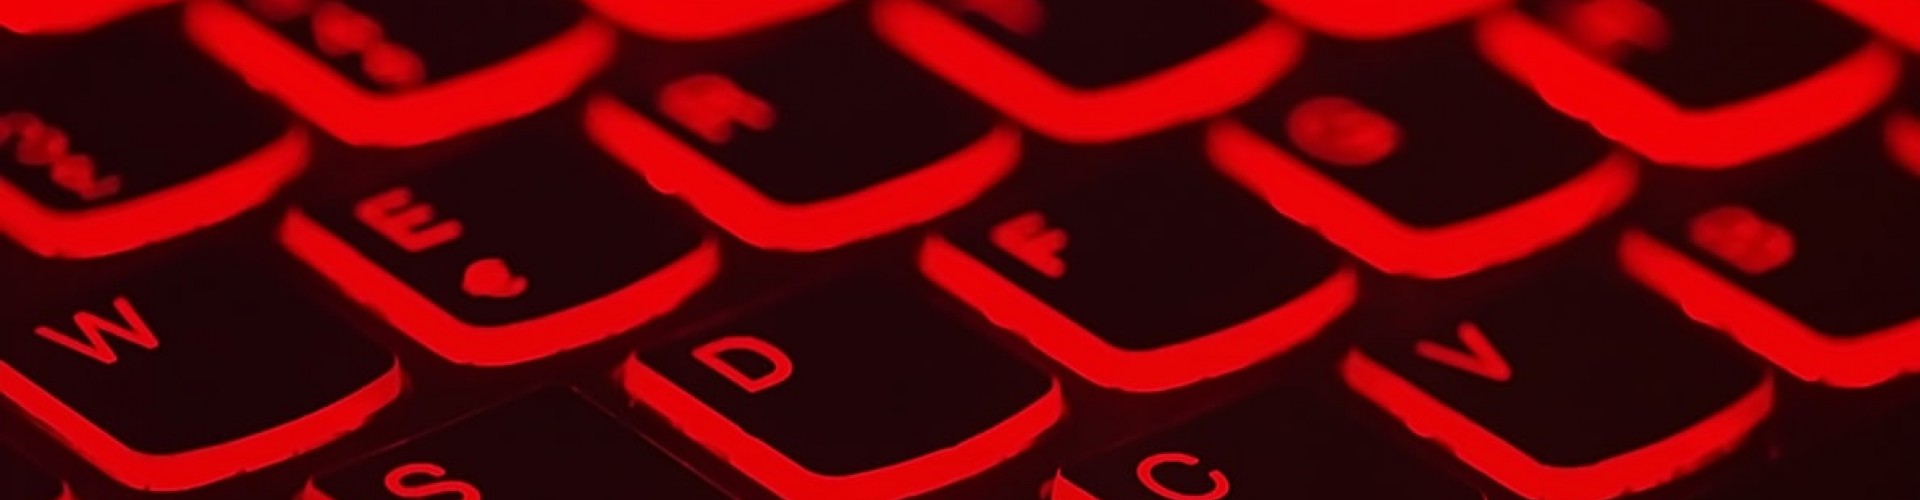 computer keyboard with red backlighting